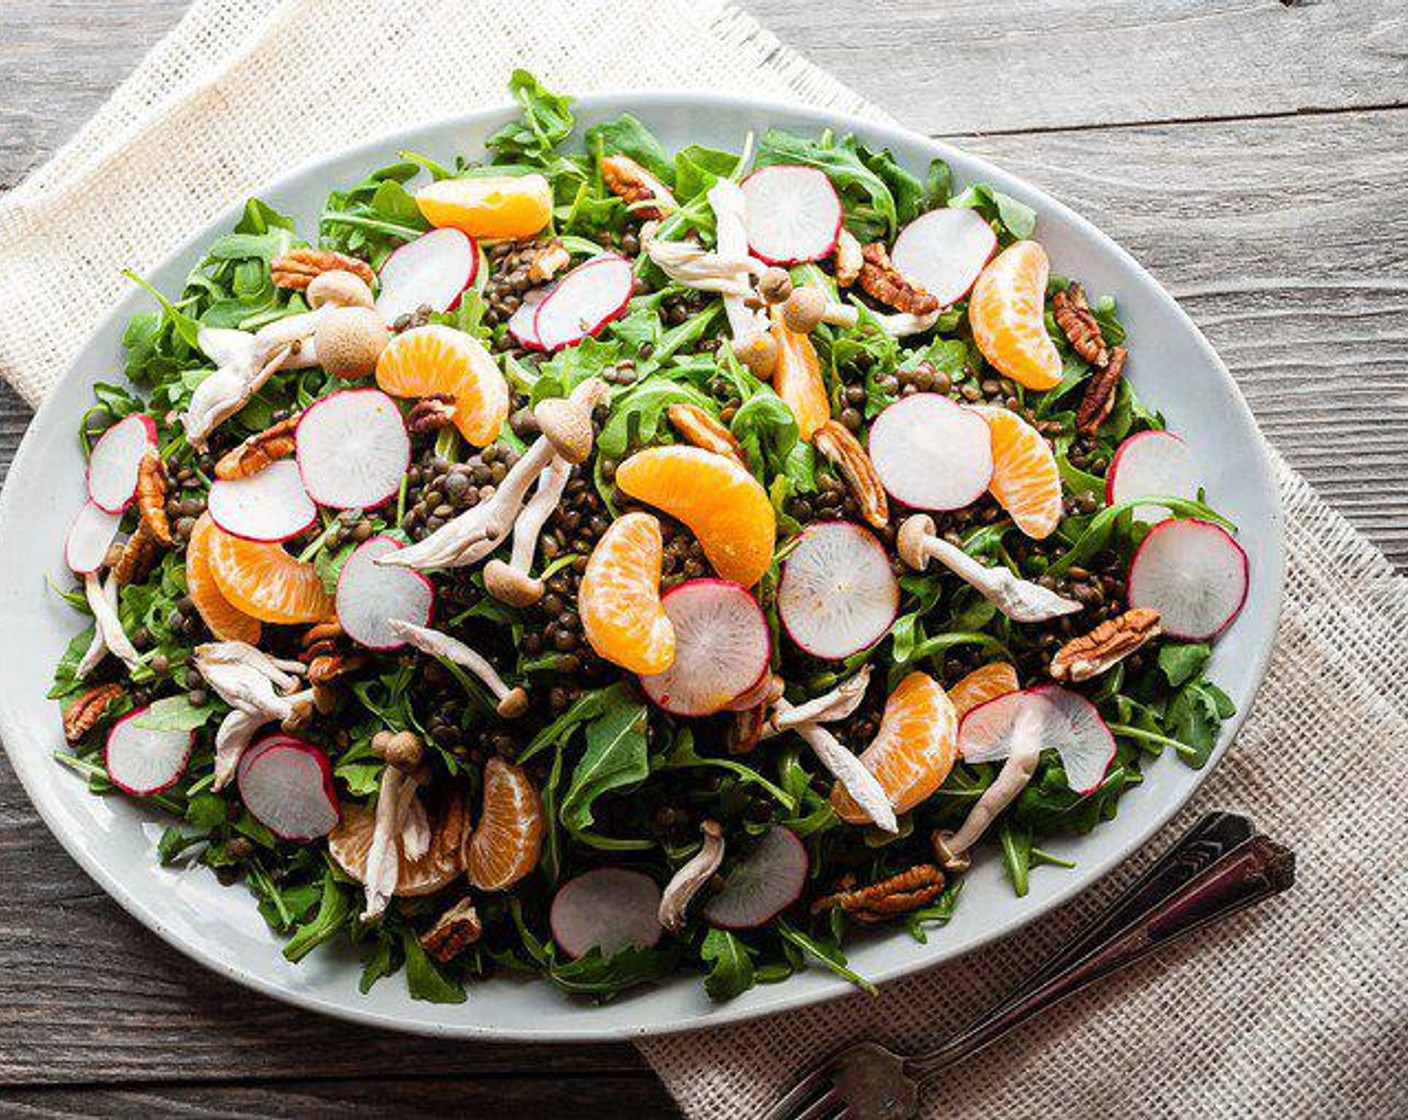 step 5 Combine lentils, Arugula (1 bunch), Radish (1 cup), Beech Mushrooms (1 1/2 cups), Clementines (3), and Pecans (1/2 cup). Dress immediately before serving. Enjoy!